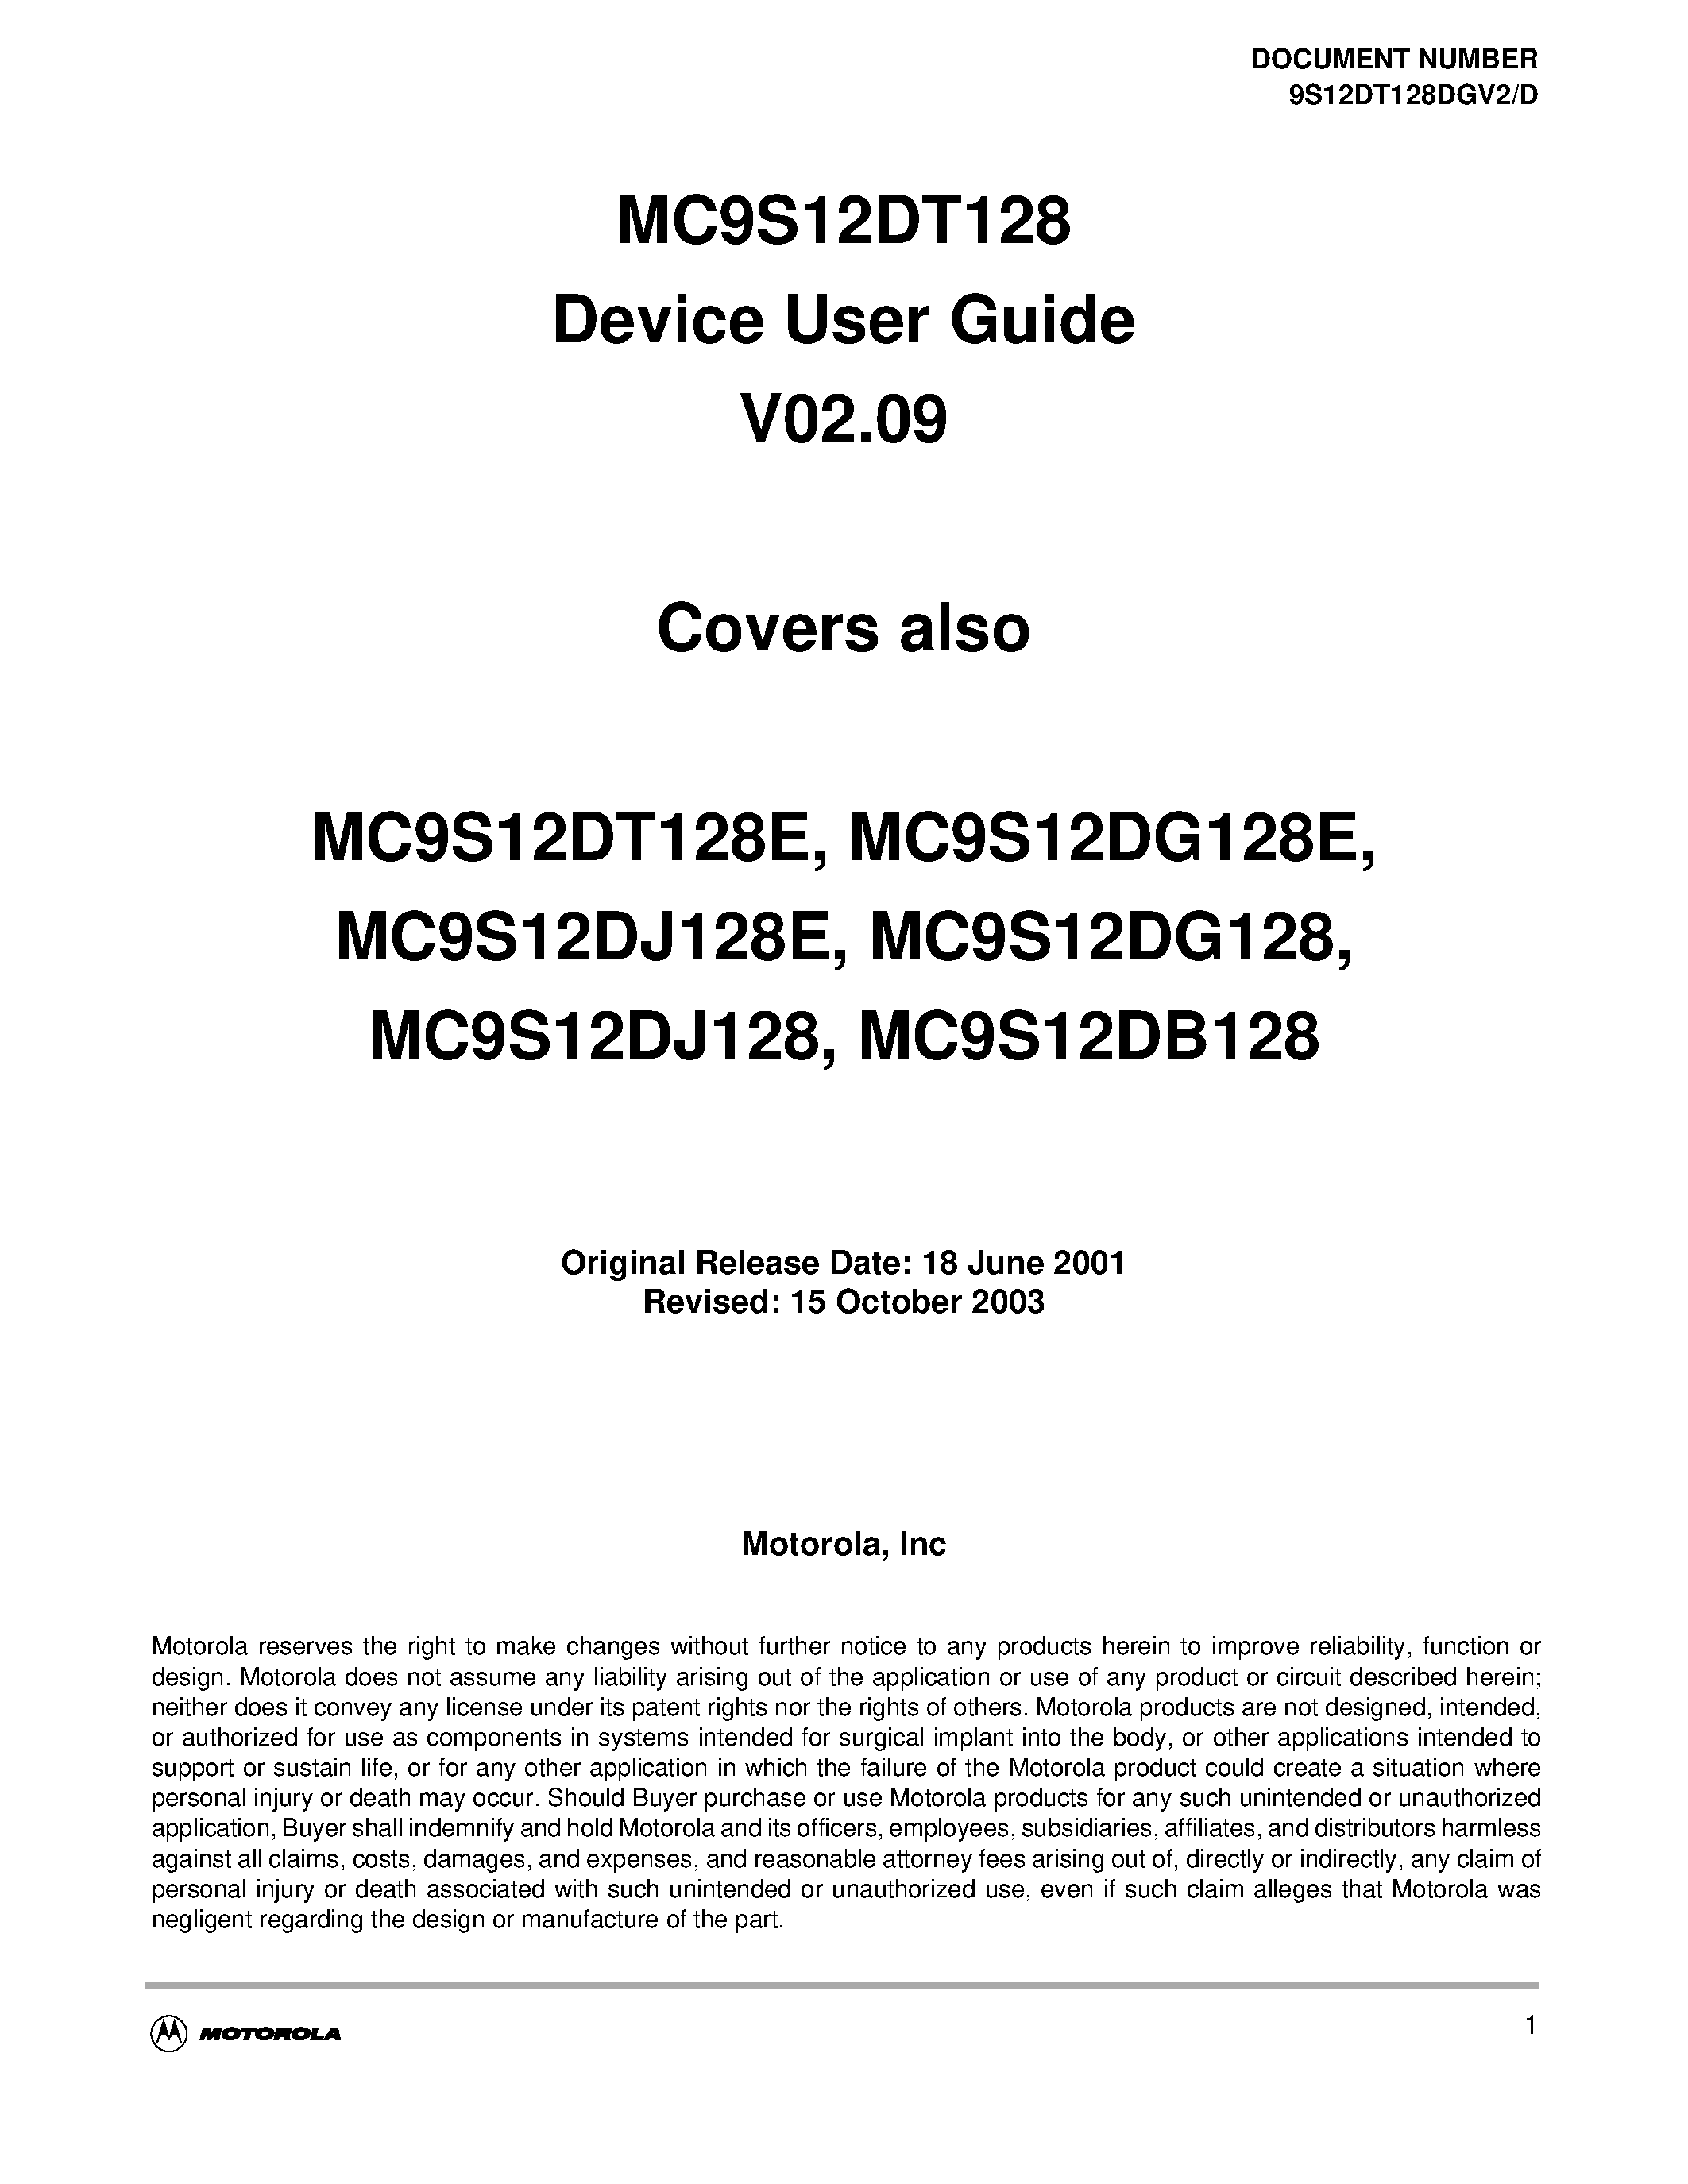 Datasheet SC515846 - MC9S12DT128 Device User Guide V02.09 page 1